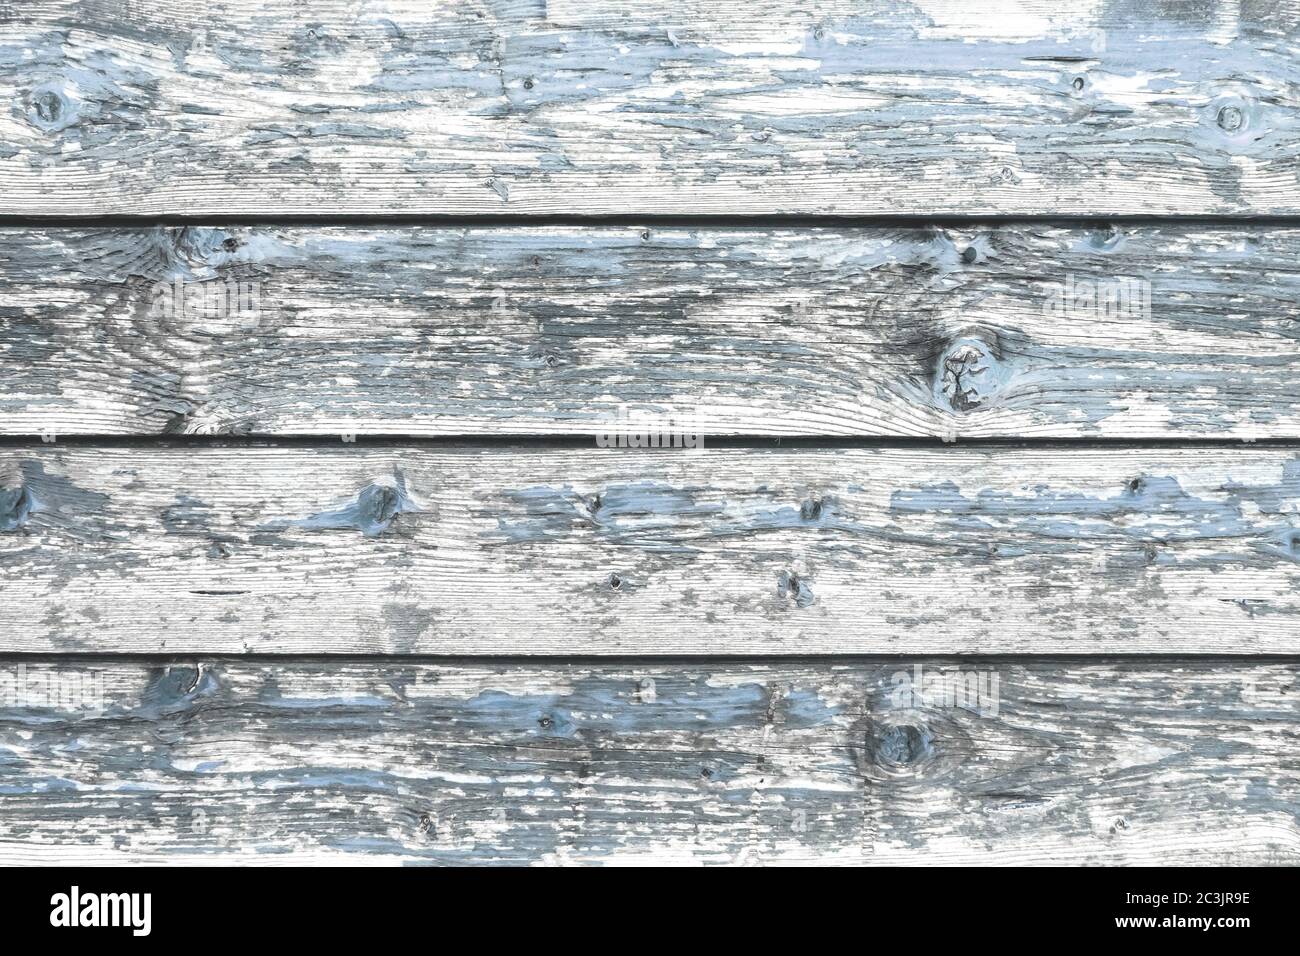 Color-Peel wood texture. Battered faded old light blue painted wooden boards with peeling. Wooden abstract background, texture. Stock Photo